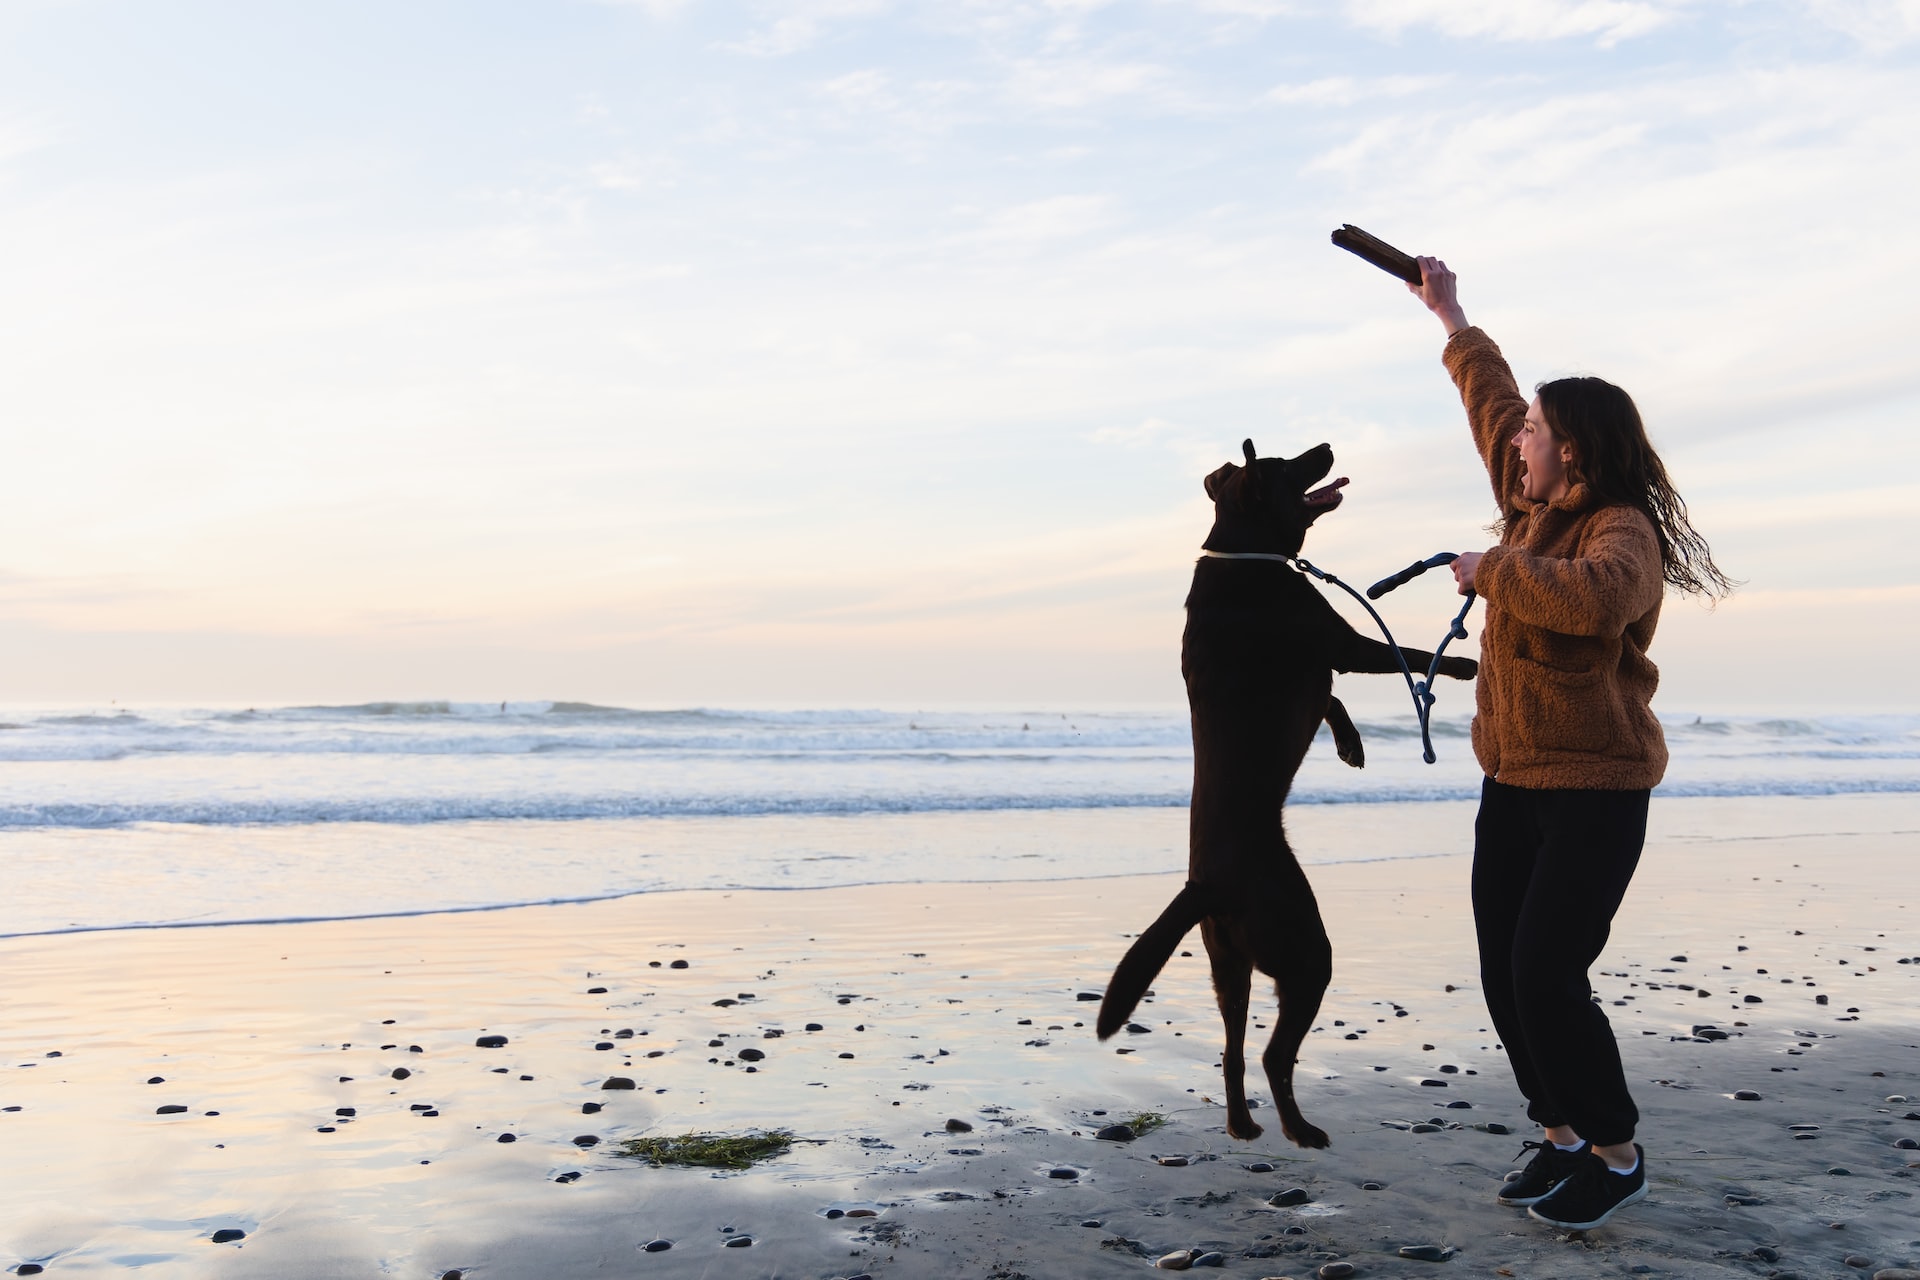 A black lab jumping for a stick in its owner's outstretched hand on the beach.